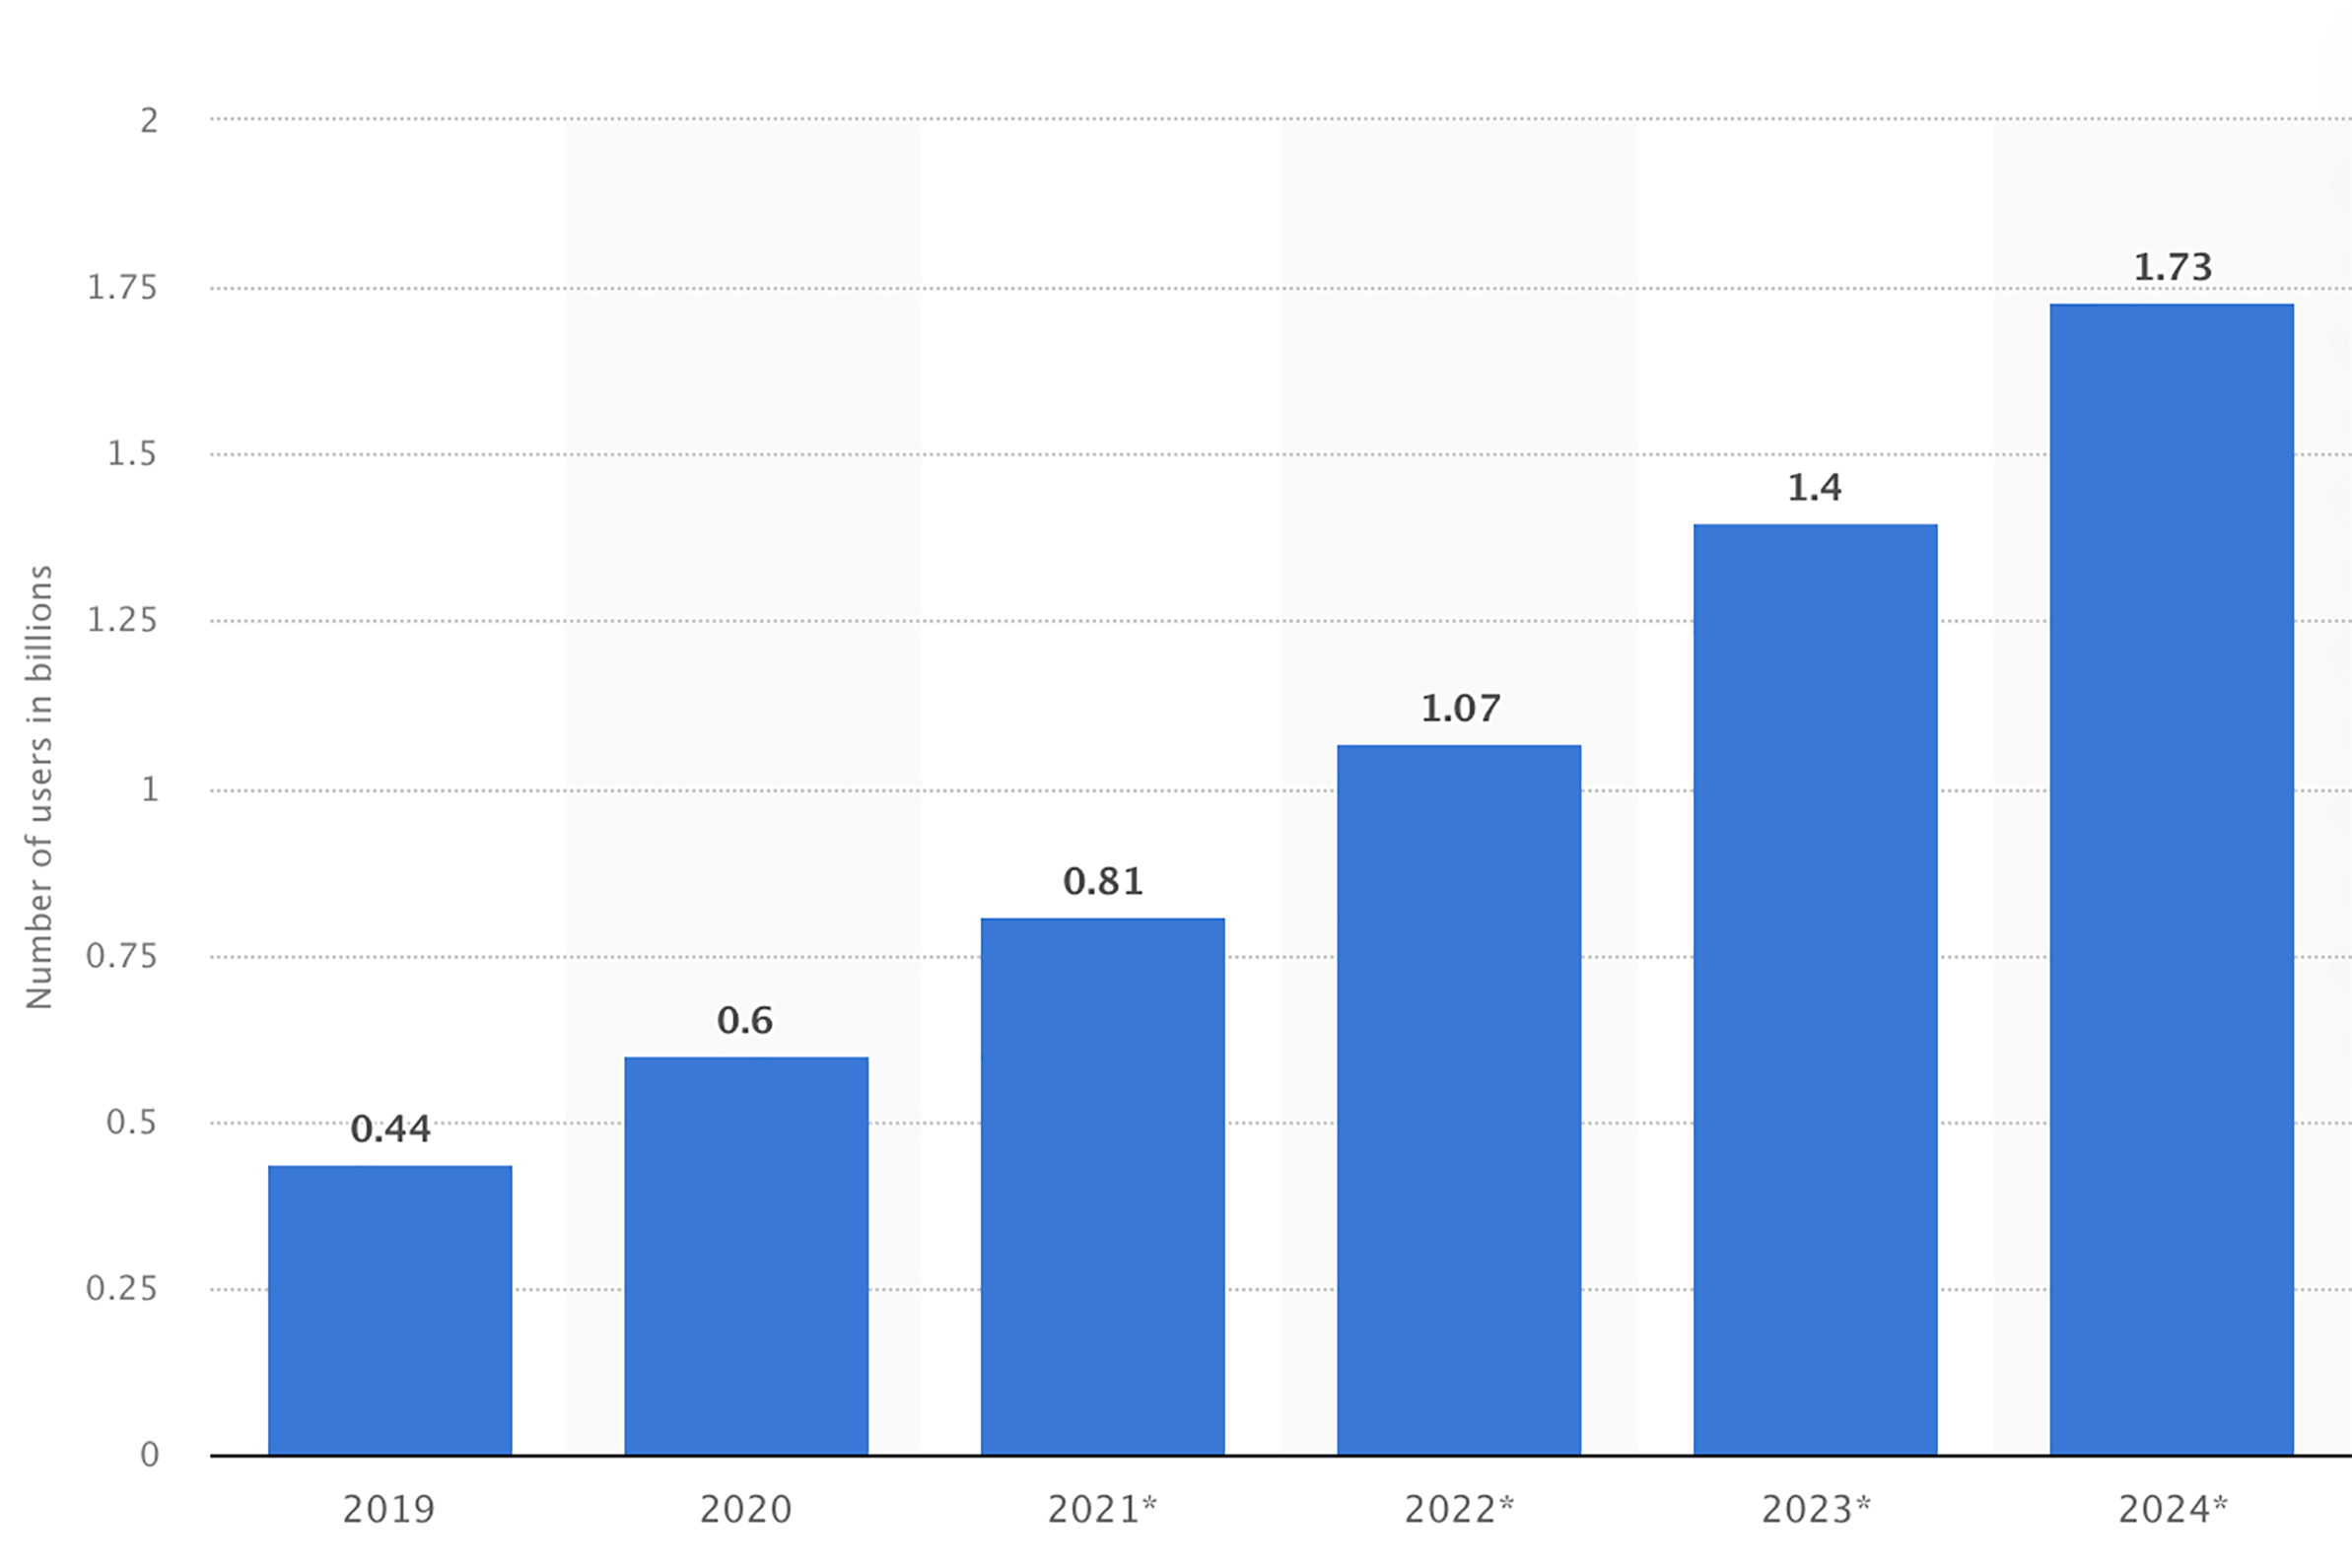 Number of mobile AR active user devices worldwide from 2019 to 2024